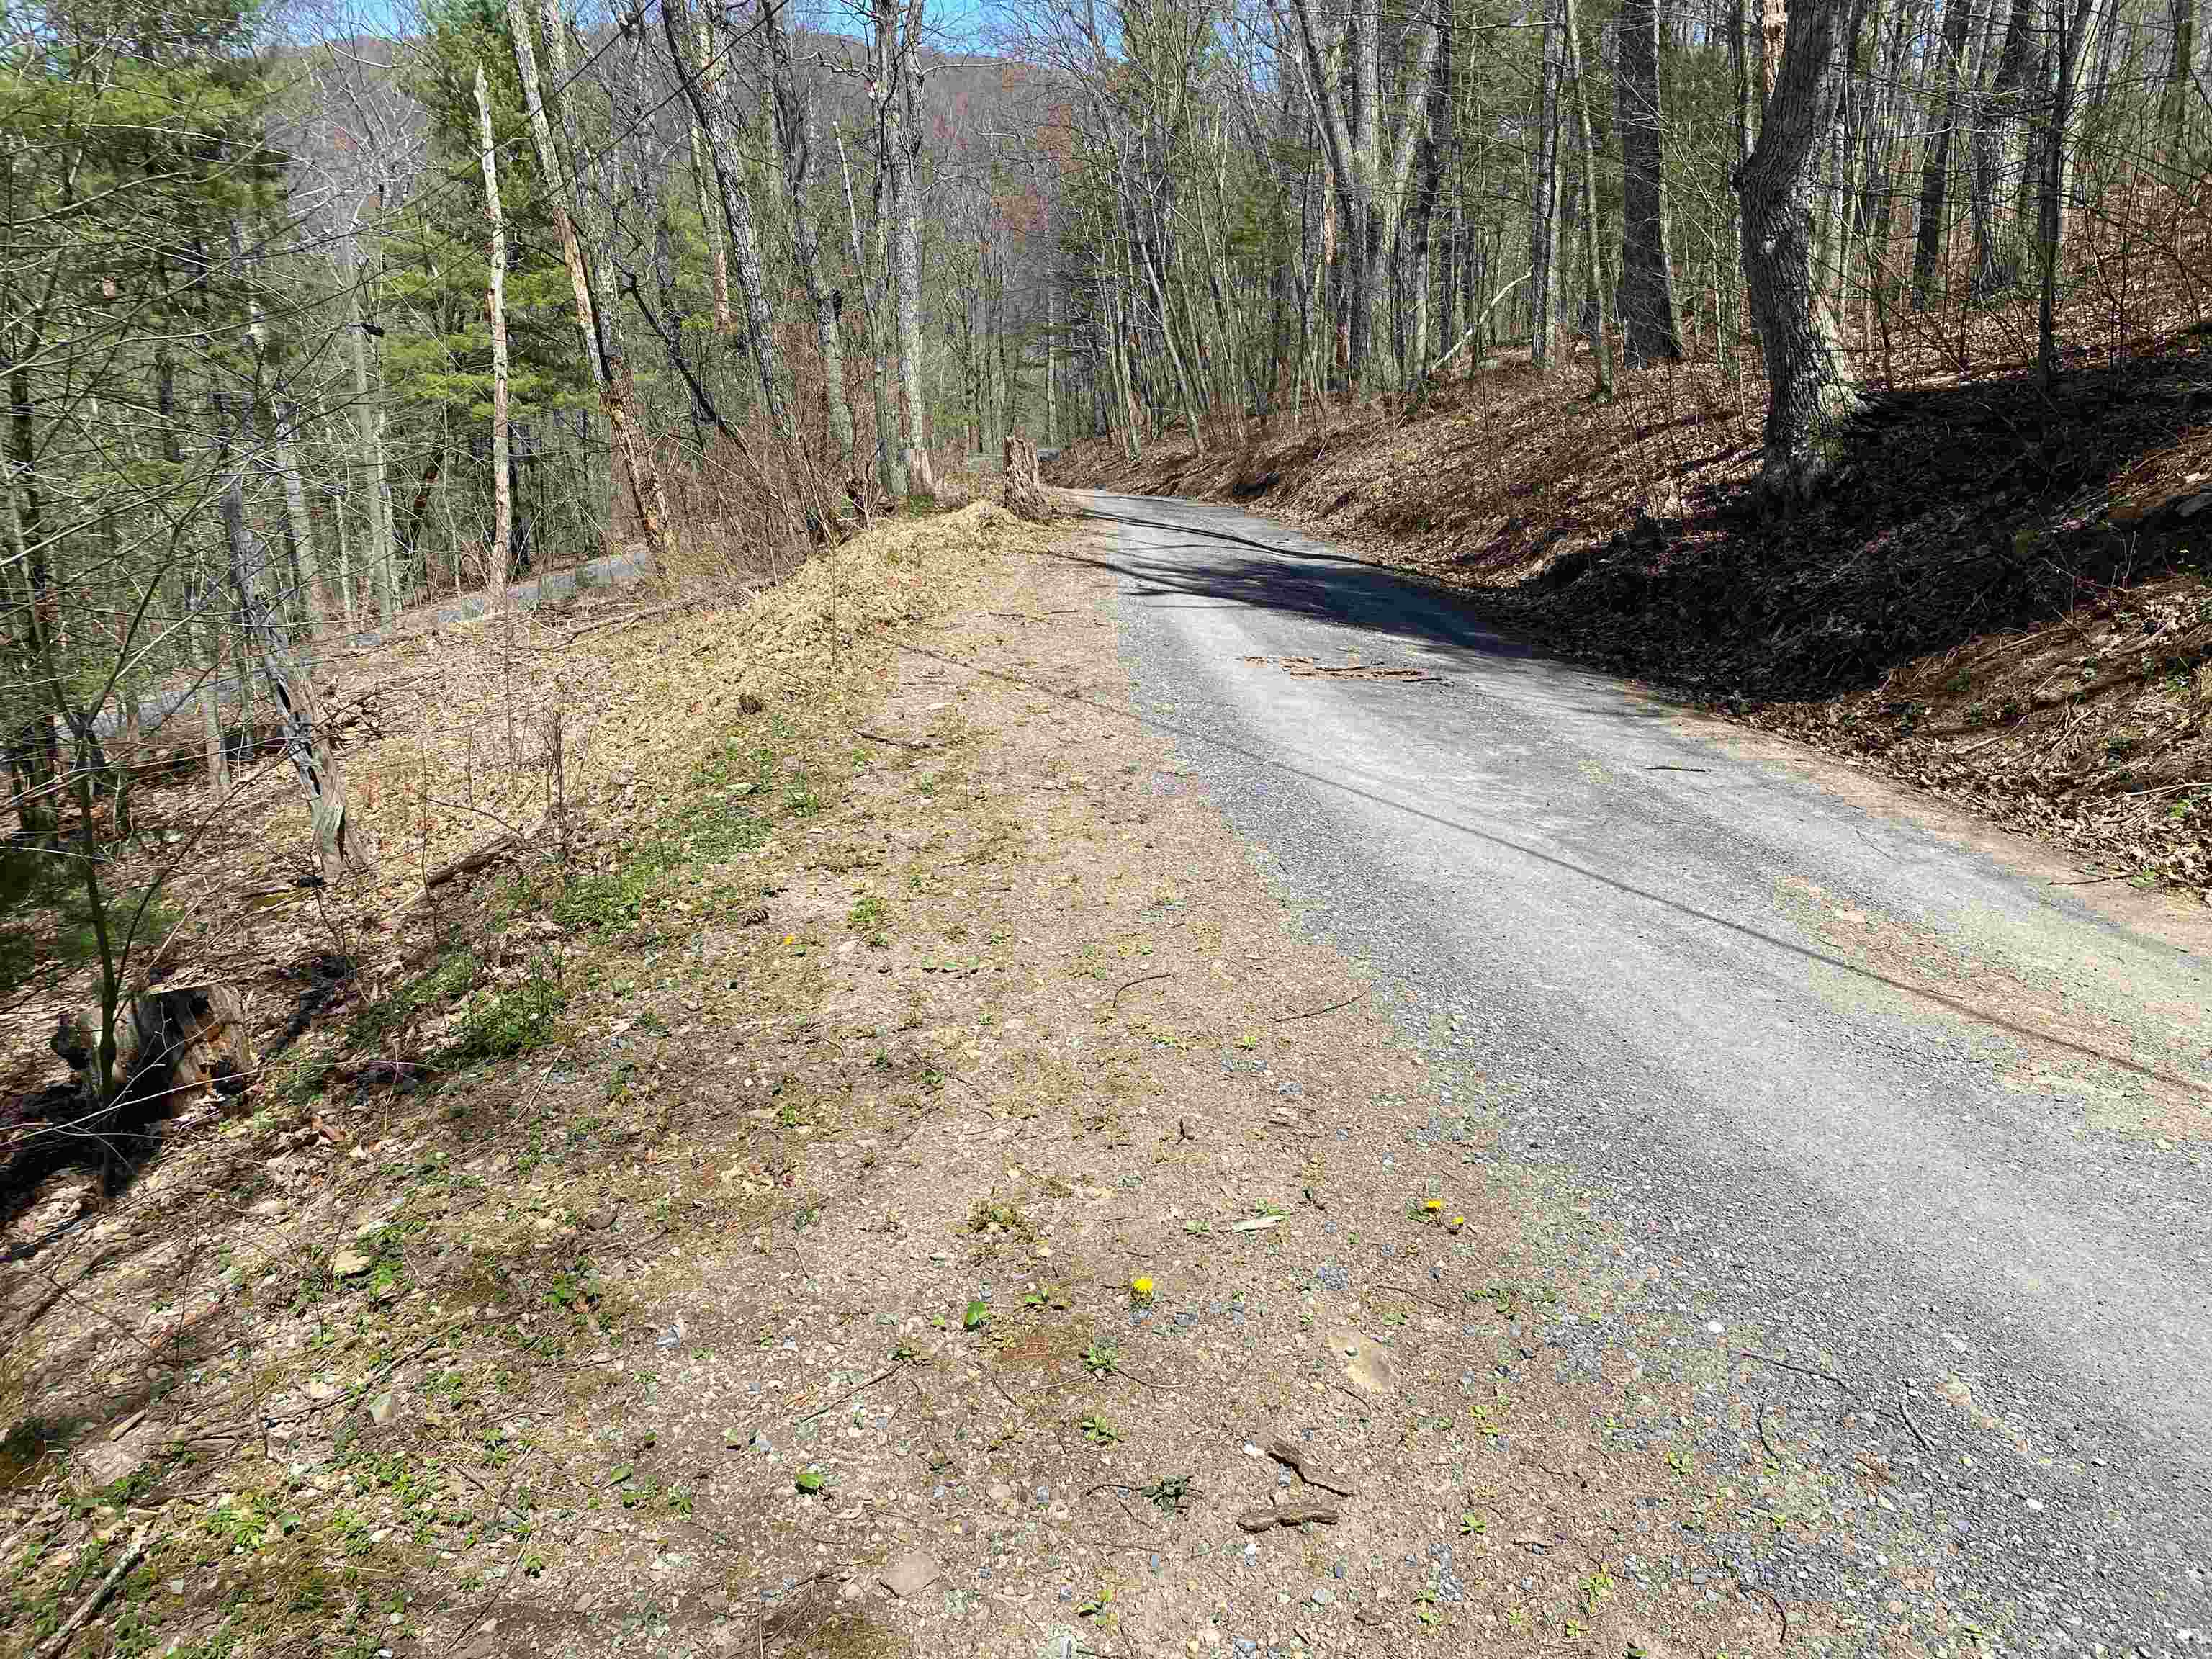 TBD CLIFF HEIGHTS RD, STANLEY, Virginia 22851, ,Land,TBD CLIFF HEIGHTS RD,651955 MLS # 651955